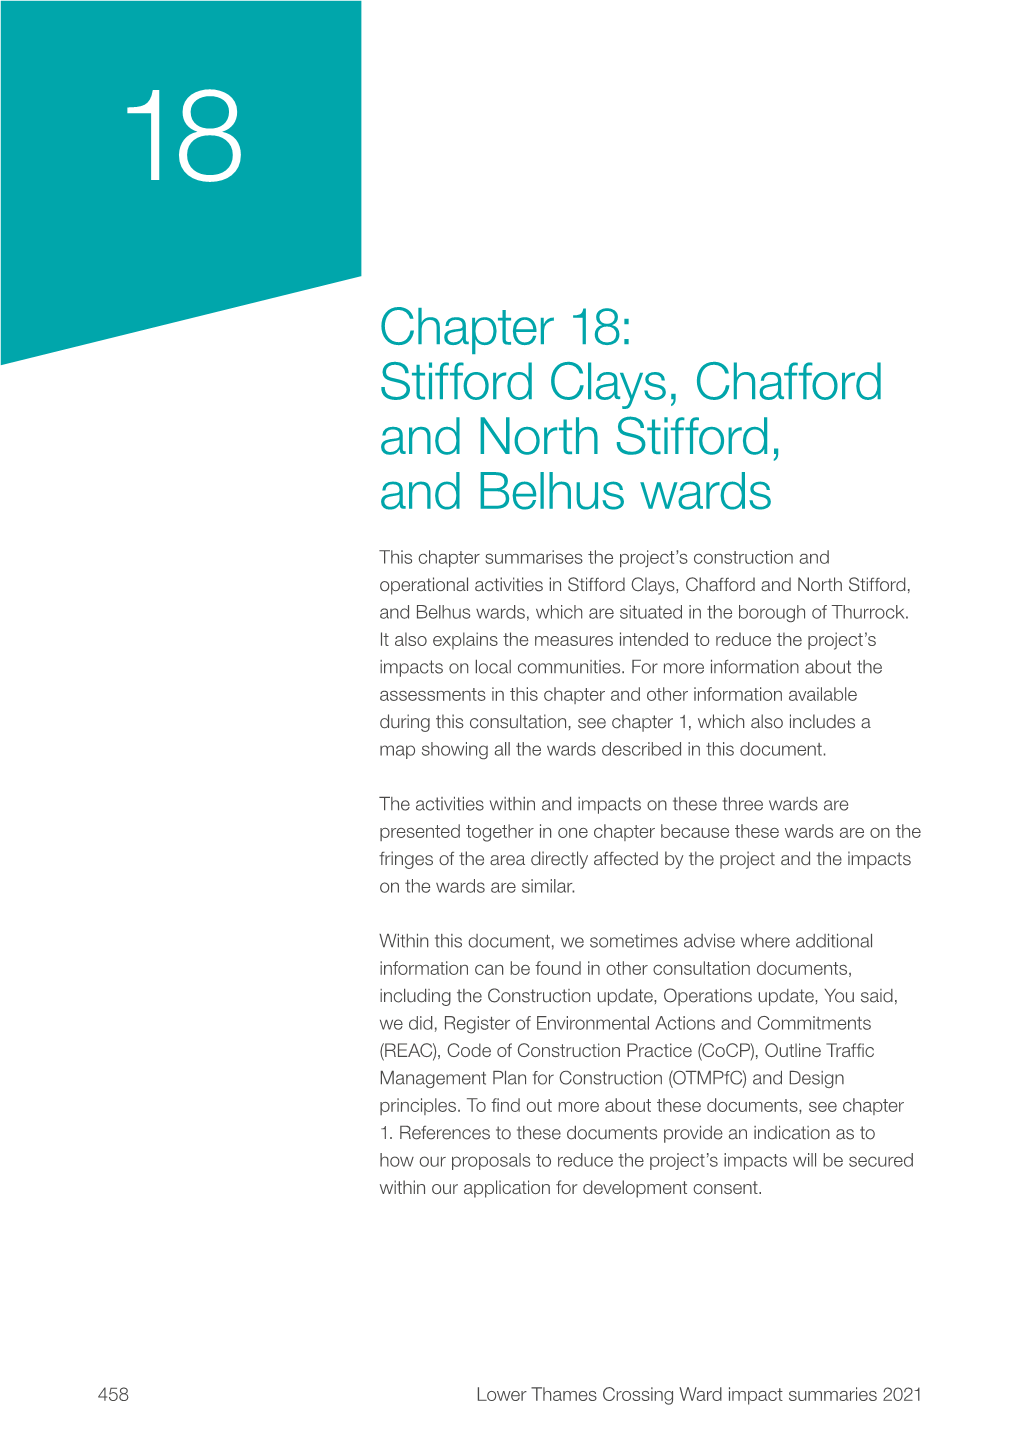 Chapter 18: Stifford Clays, Chafford and North Stifford, and Belhus Wards